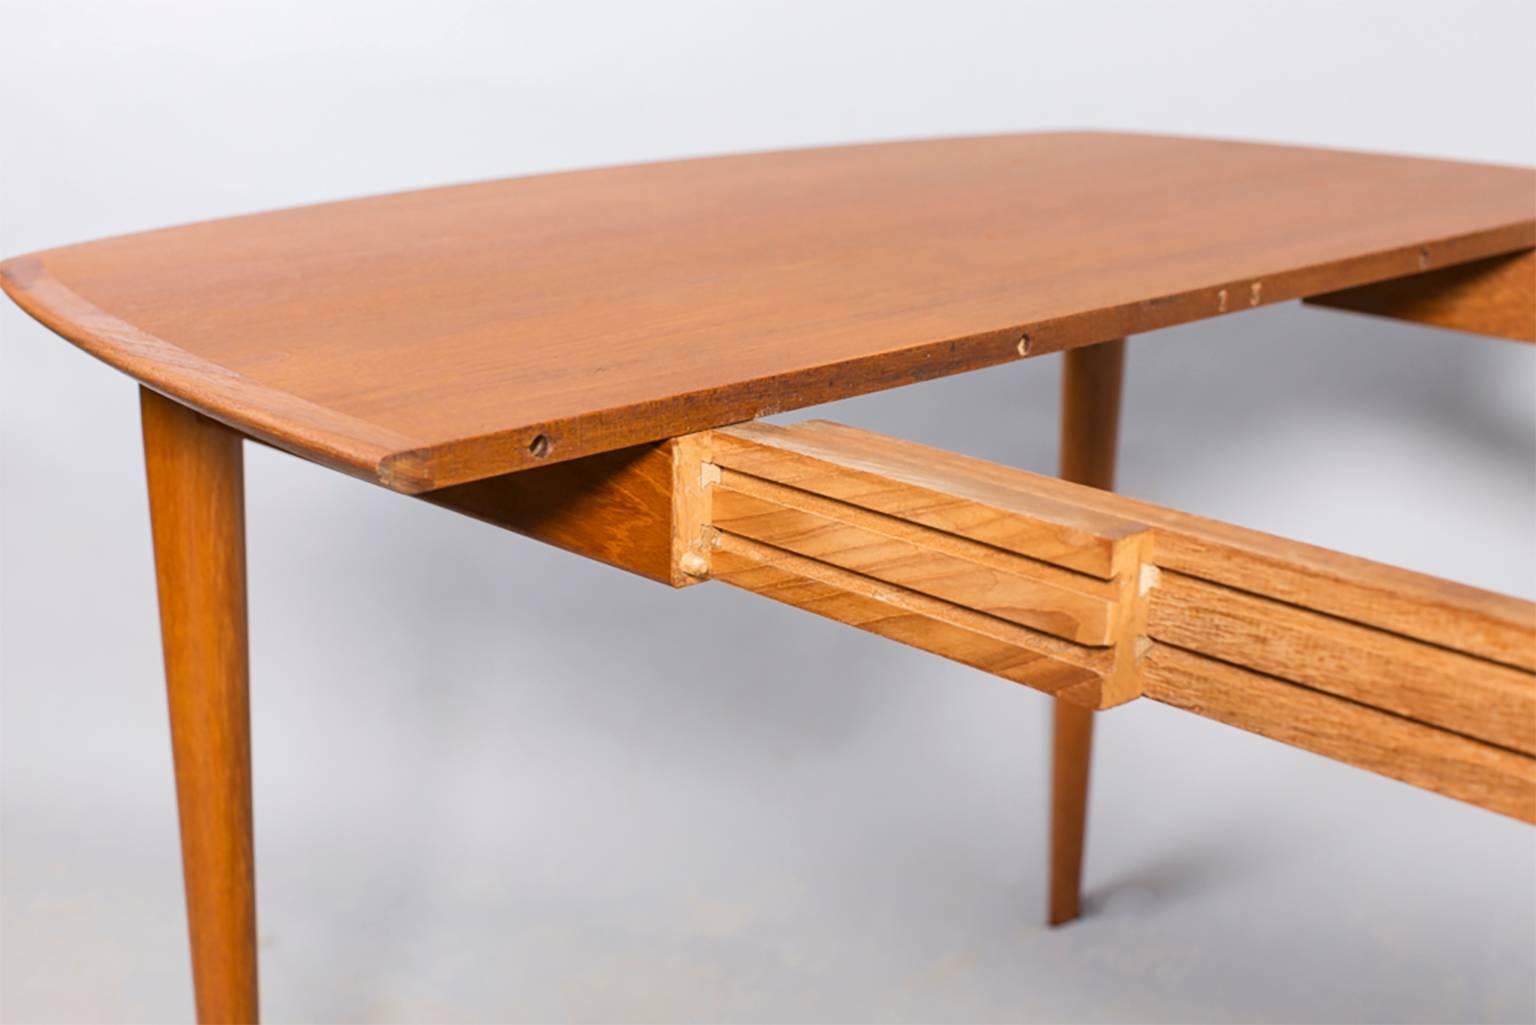 Vintage 1960s square teak dining table.

Square teak dining table with bowed sides. Three additional leaves that are inches 22